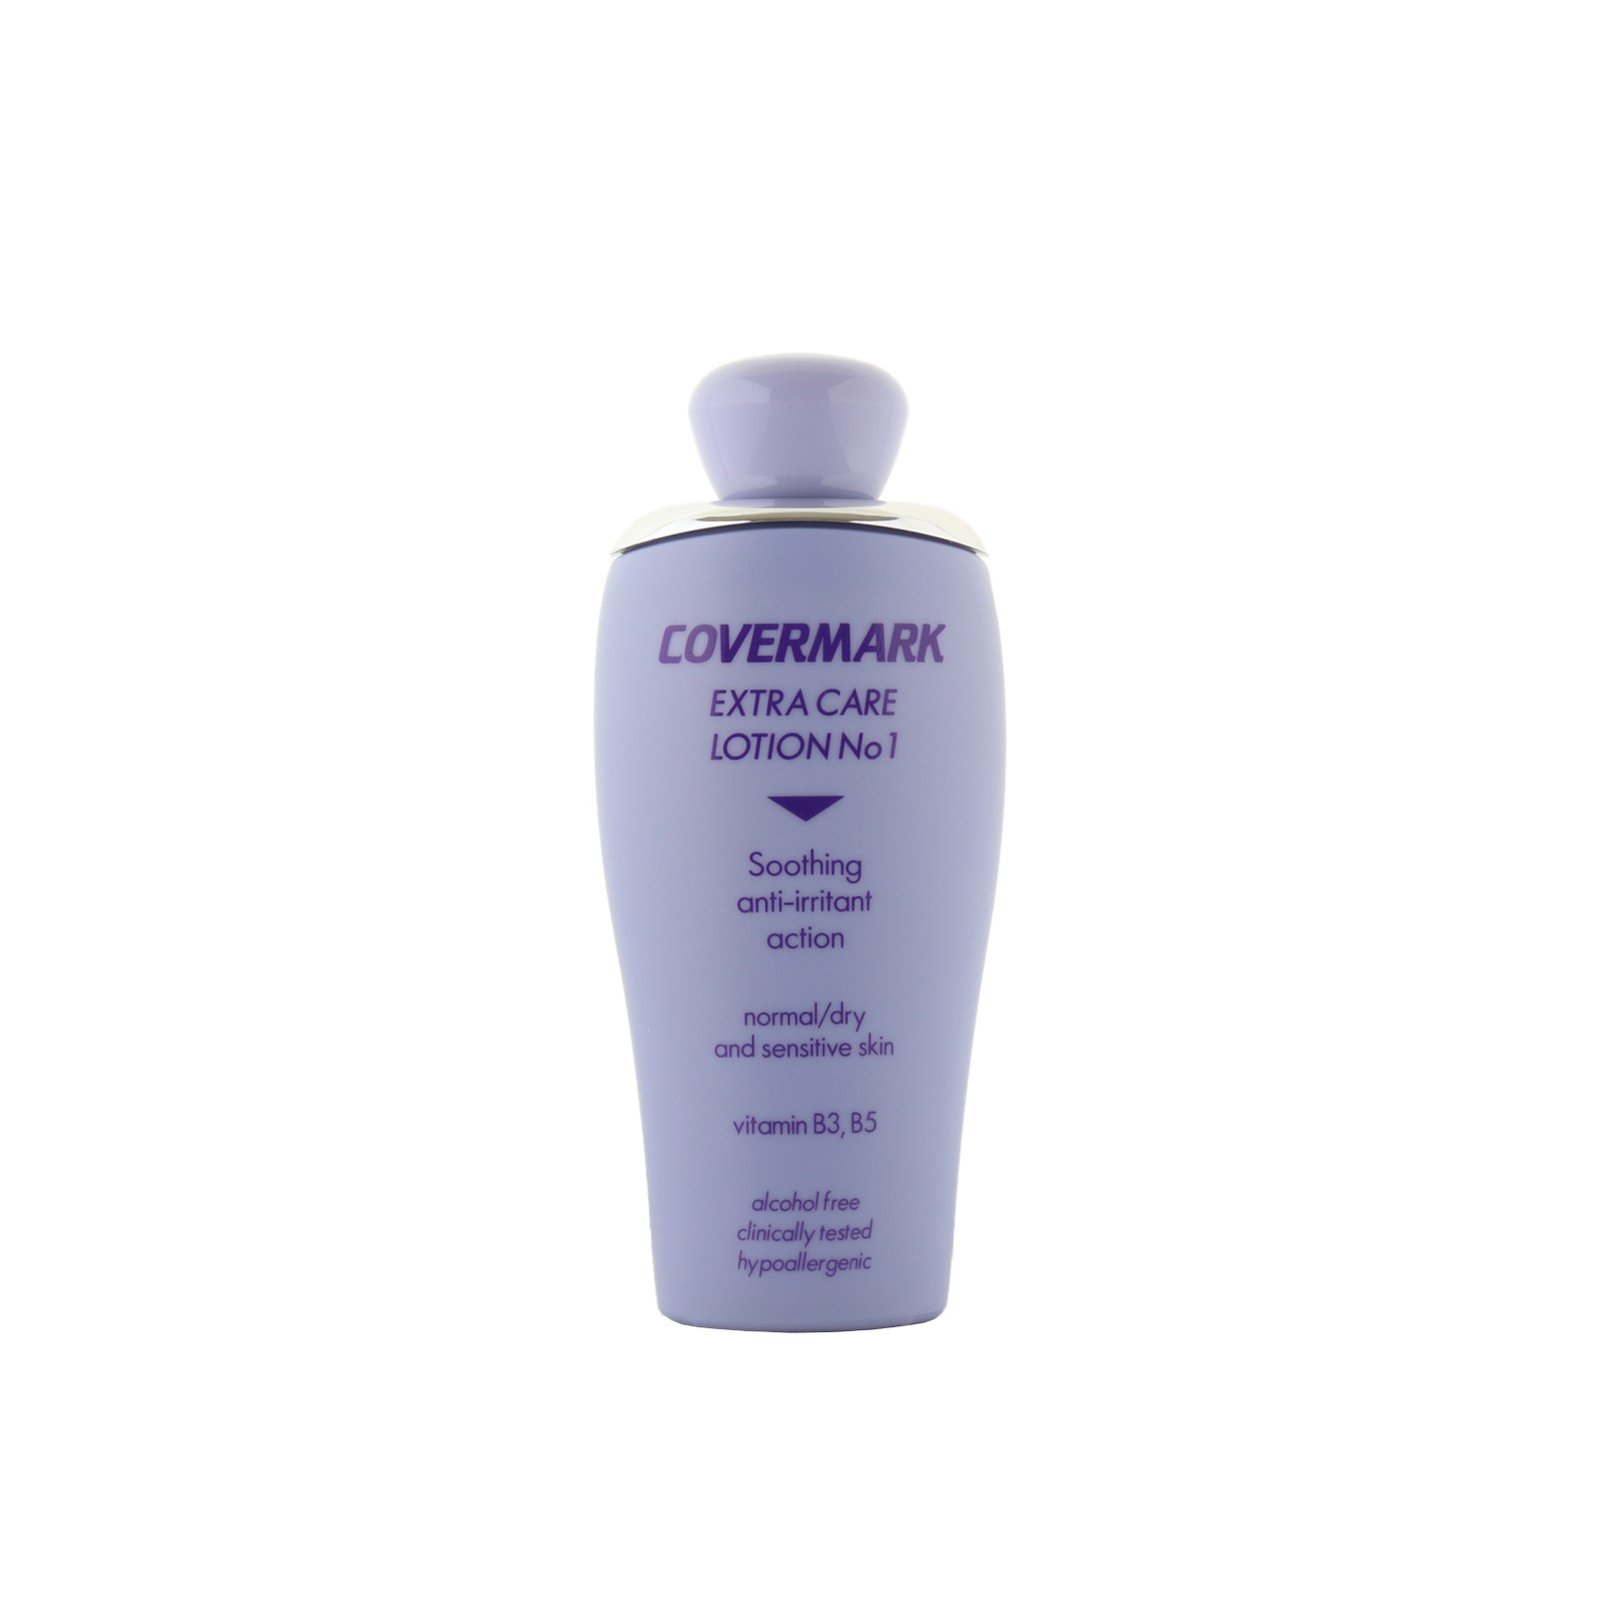 Covermark Extra Care Lotion No1 Normal/Dry And Sensitive Skin 200ml